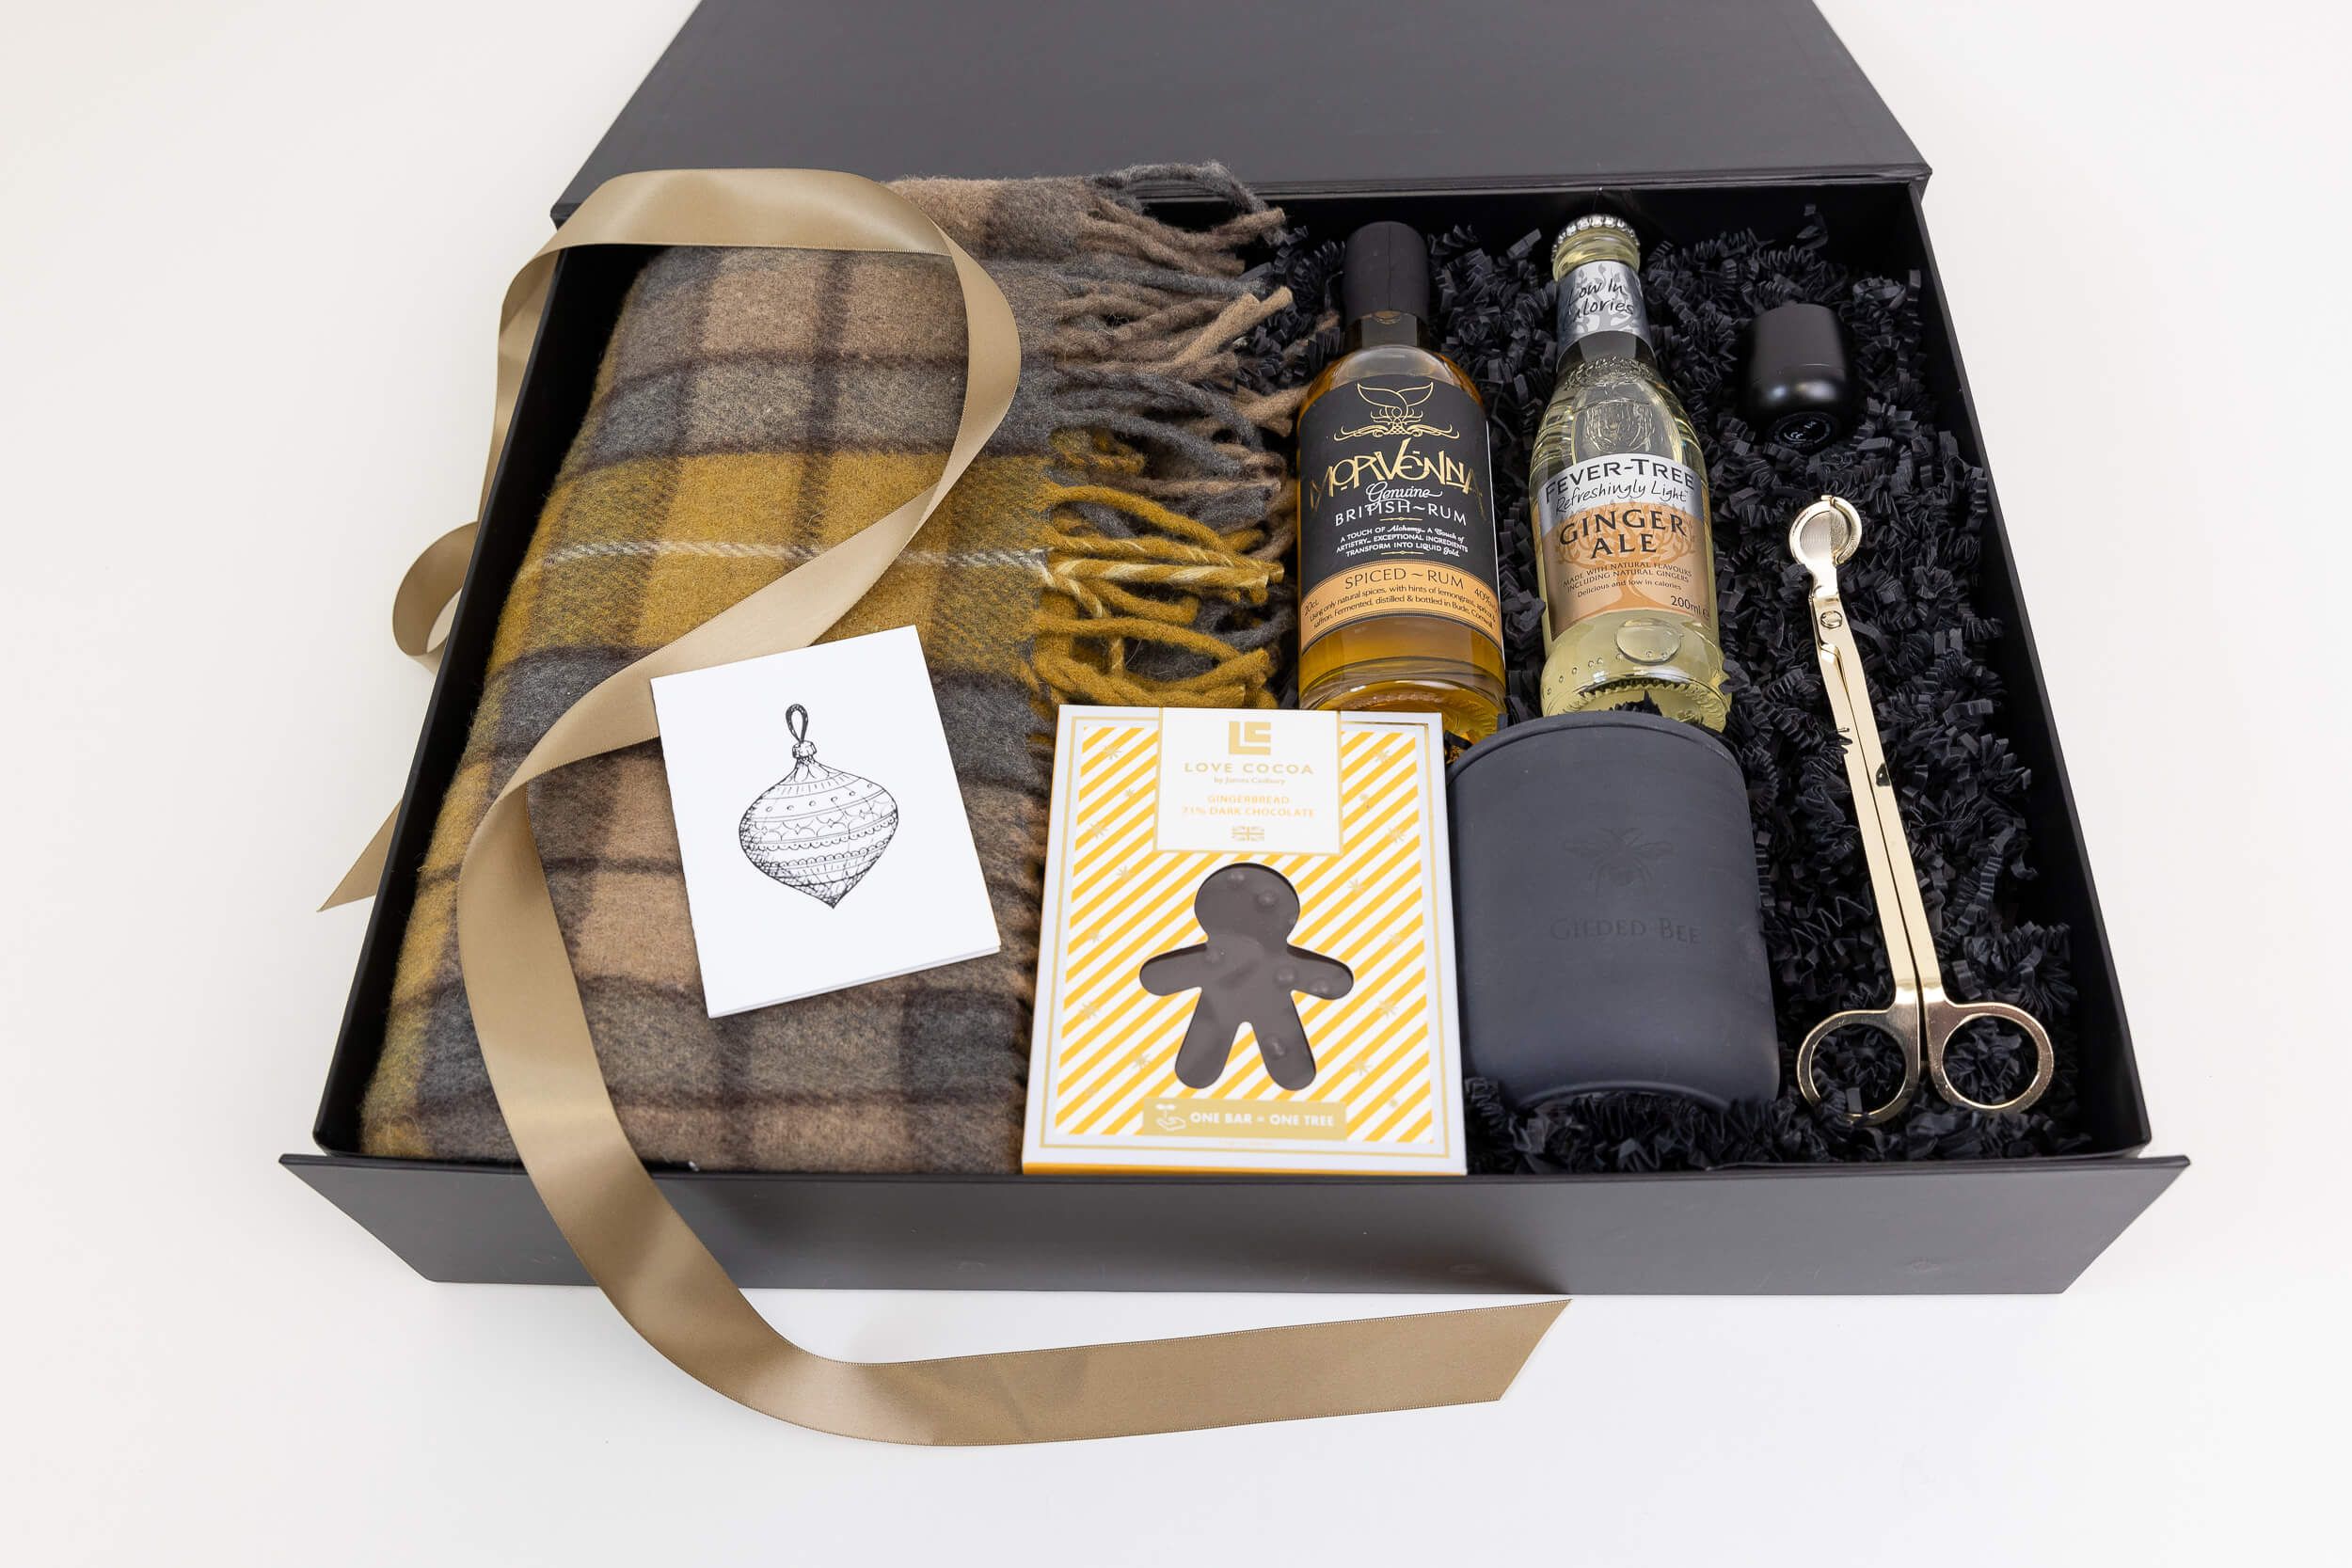 Fireside Nights Christmas Employee Gifts with tartan blanket, Love Cocoa Gingerbread chocolate and Lexon Speaker